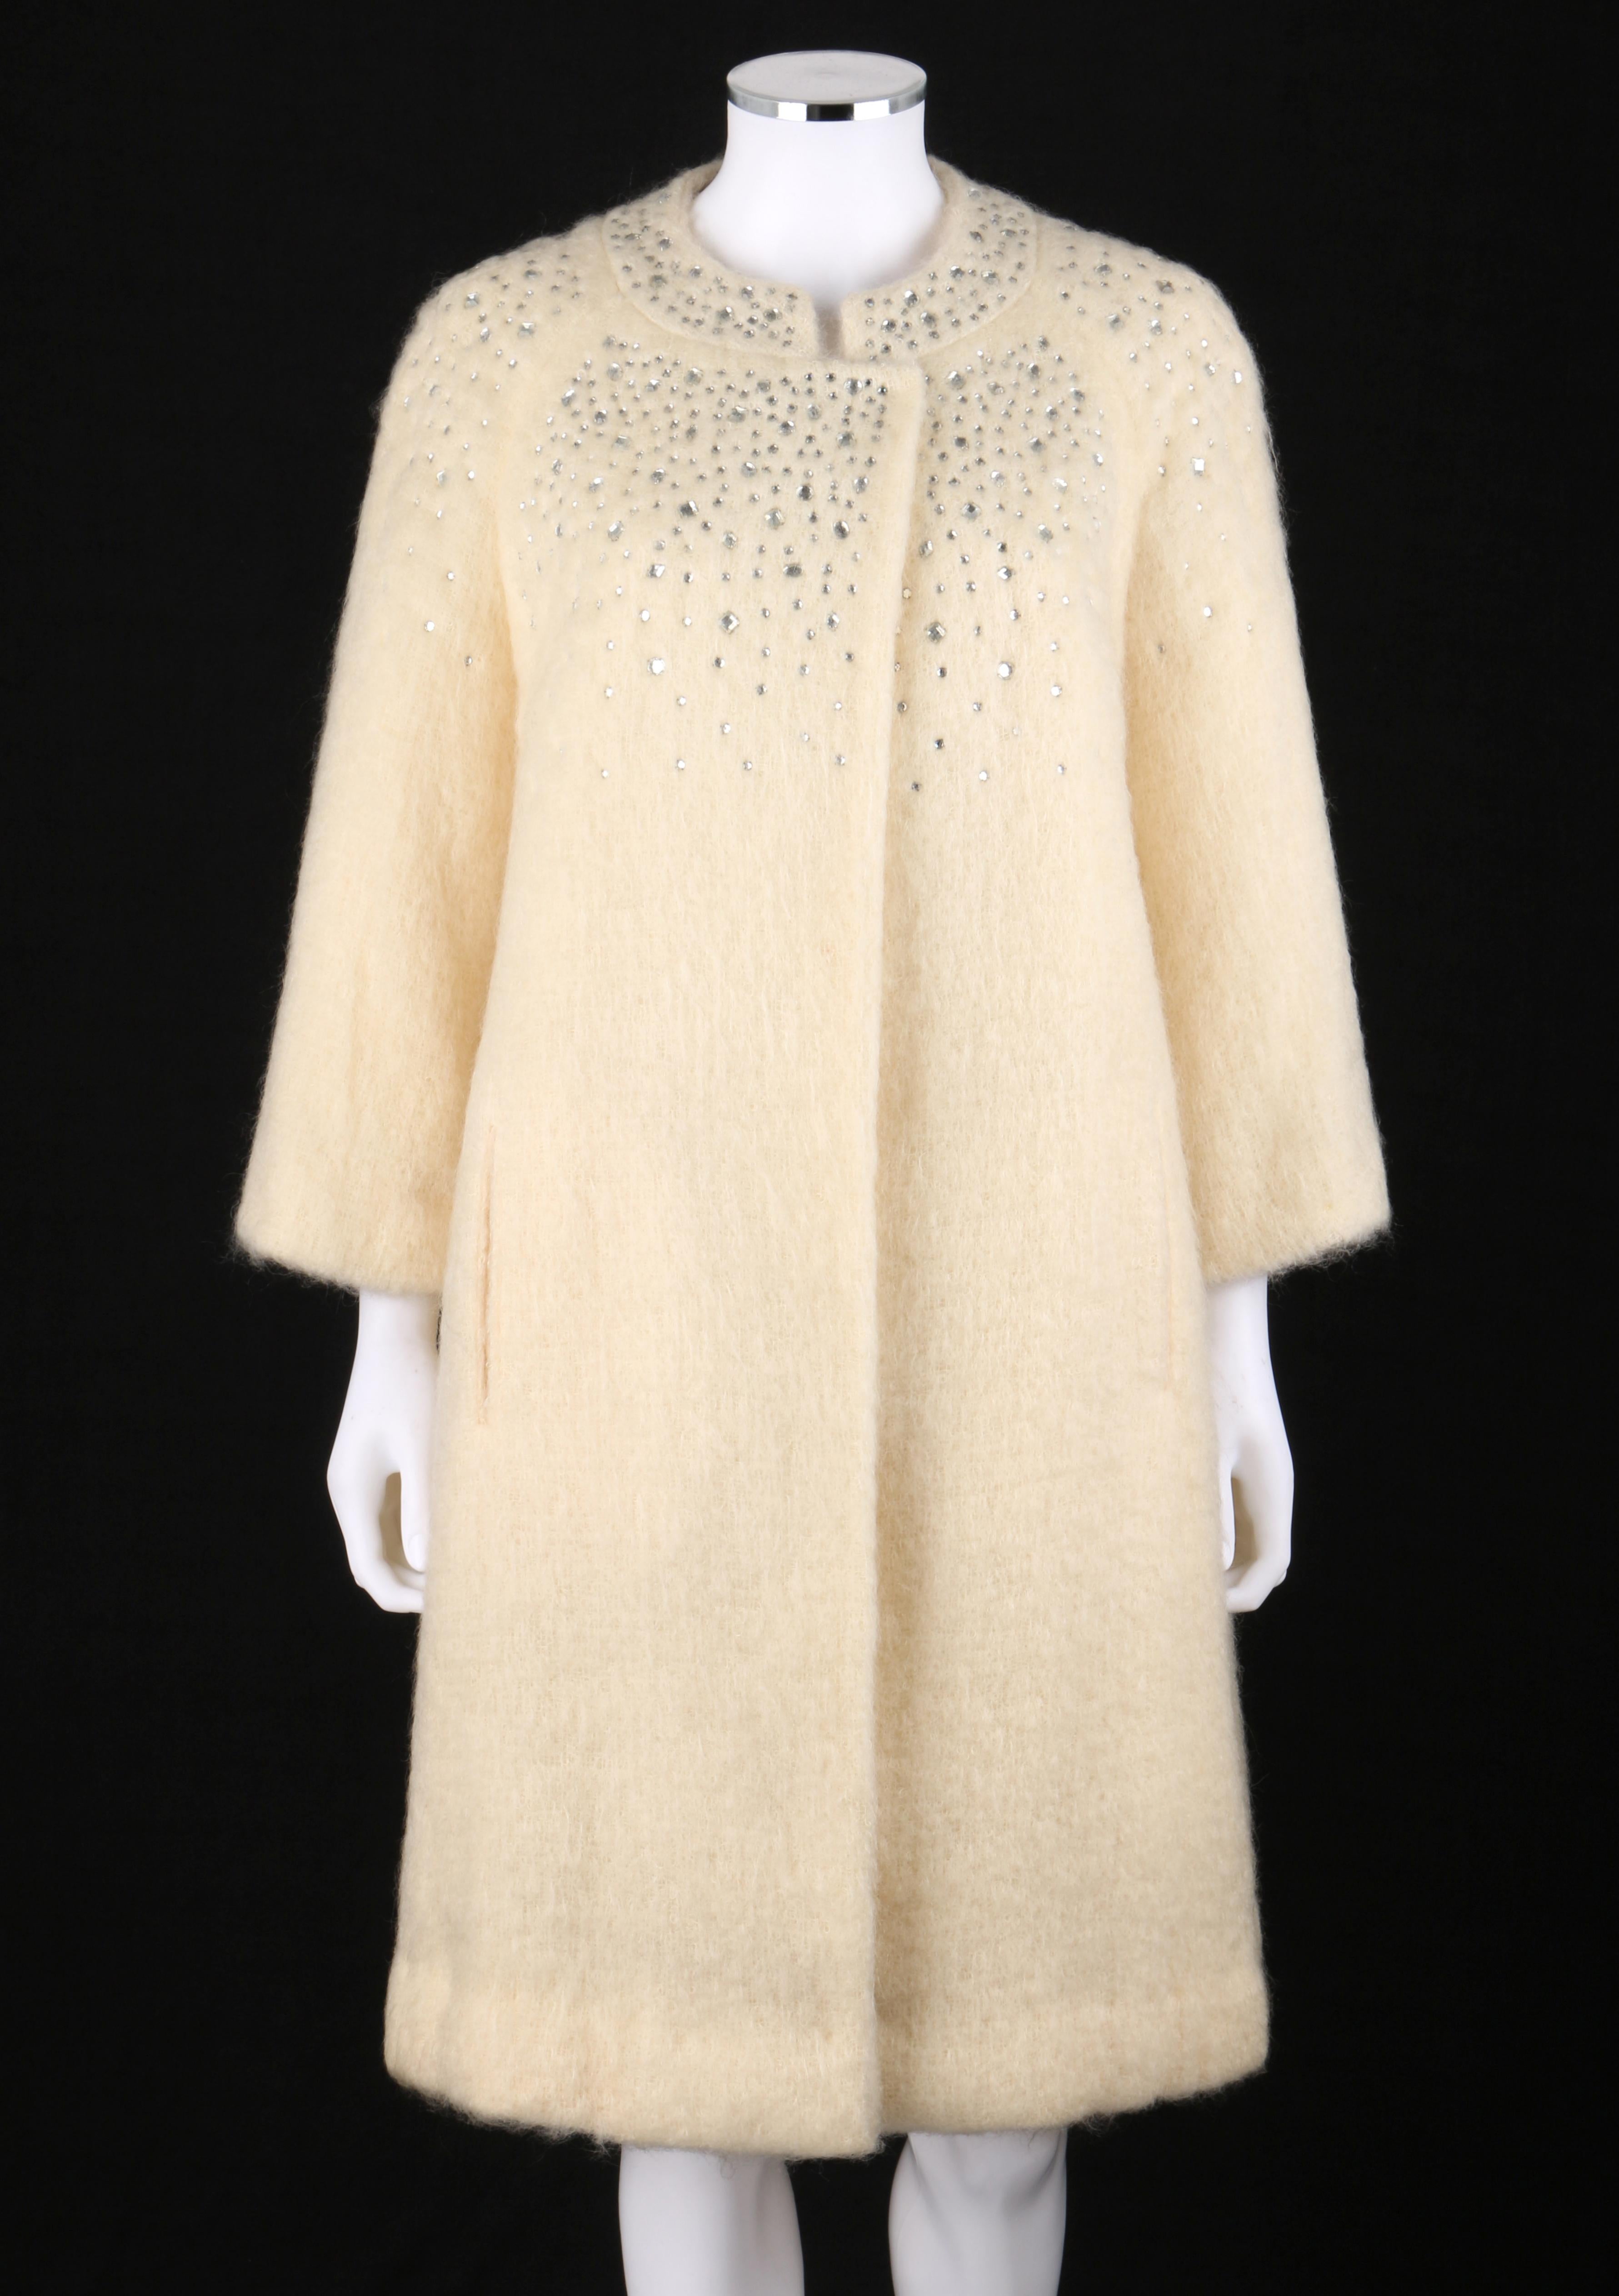 DESCRIPTION: BATALDI c.1960's Ivory Mohair Crystal Rhinestone Embellished Evening Coat
 
Circa: c.1960’s
Label(s): By Baltaldi New York; Union Label
Style: Evening coat
Color(s): Ivory 
Lined: Yes
Unmarked Fabric Content (feel of): Shell: Mohair;